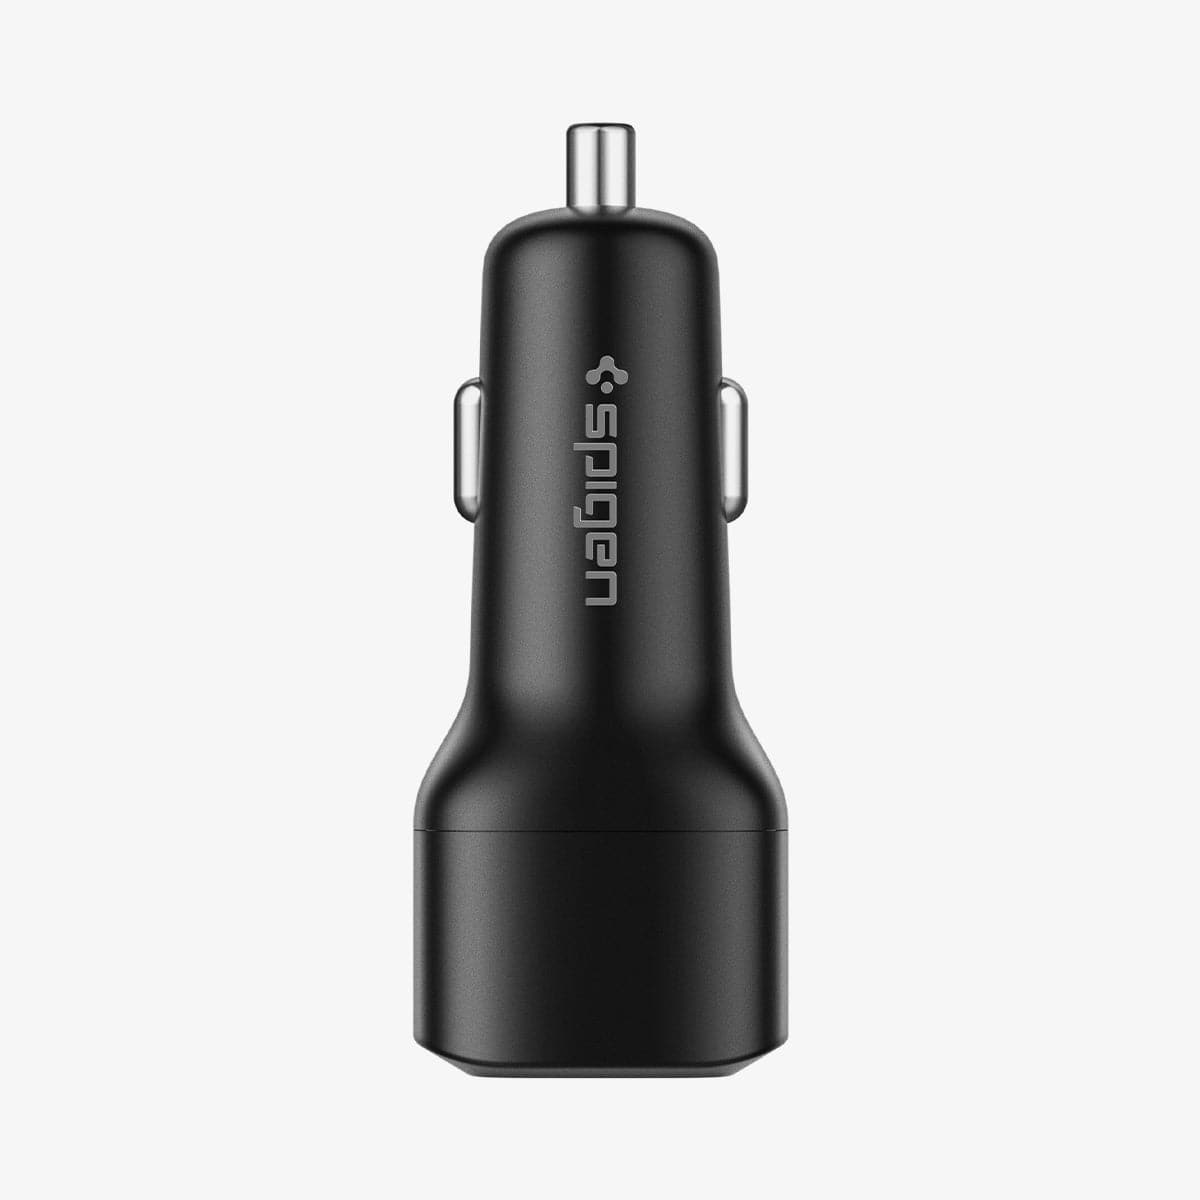 ACP02562 - ArcStation™ Car Charger PC2000 showing the front